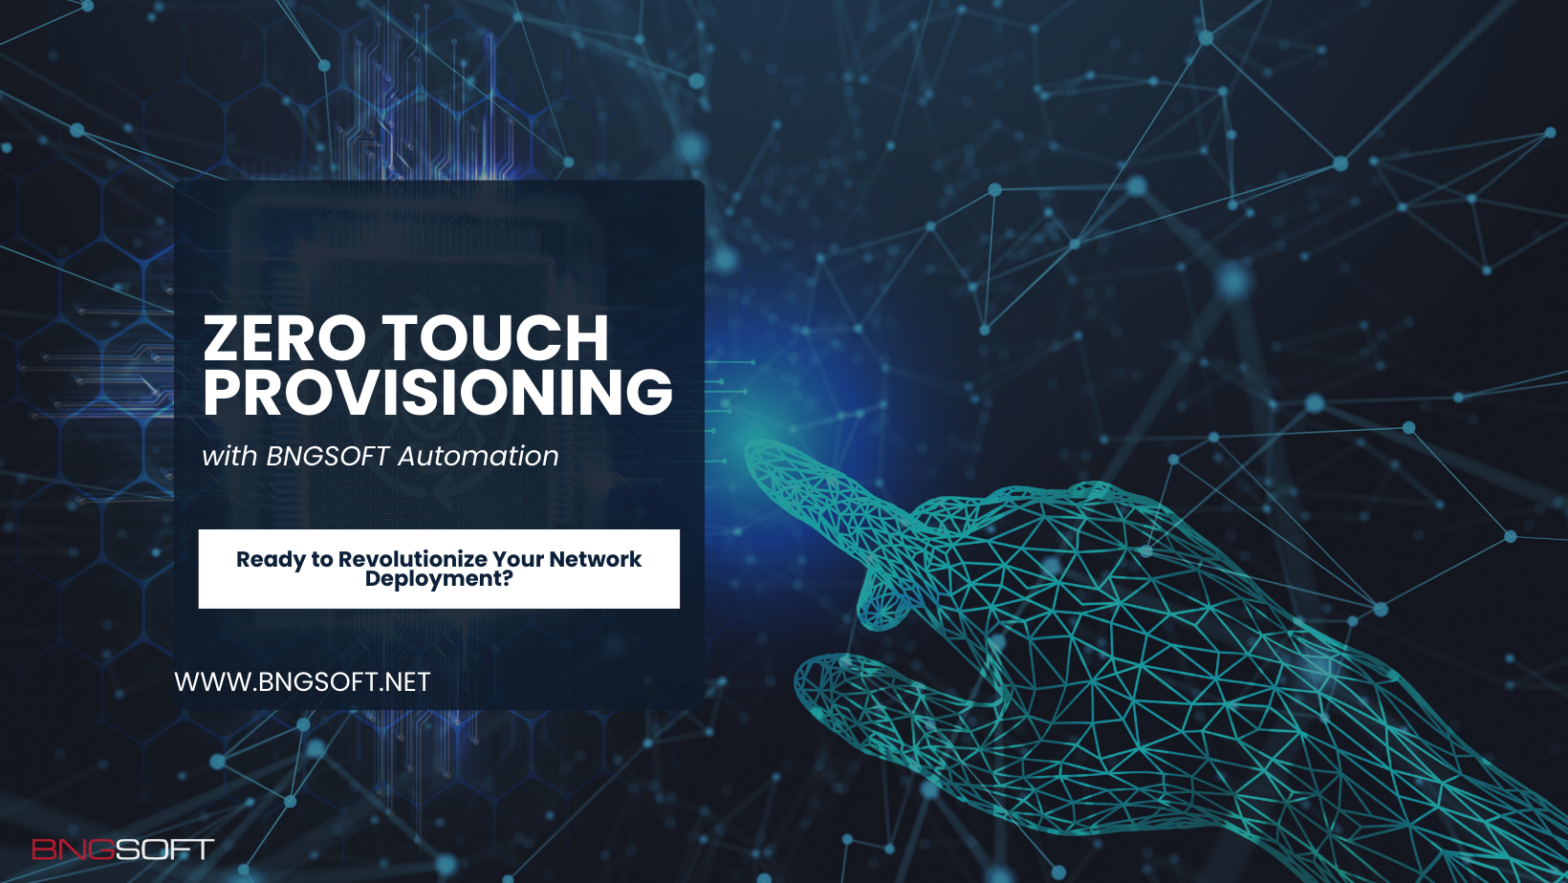 Zero Touch Provisioning with BNGSOFT Automation